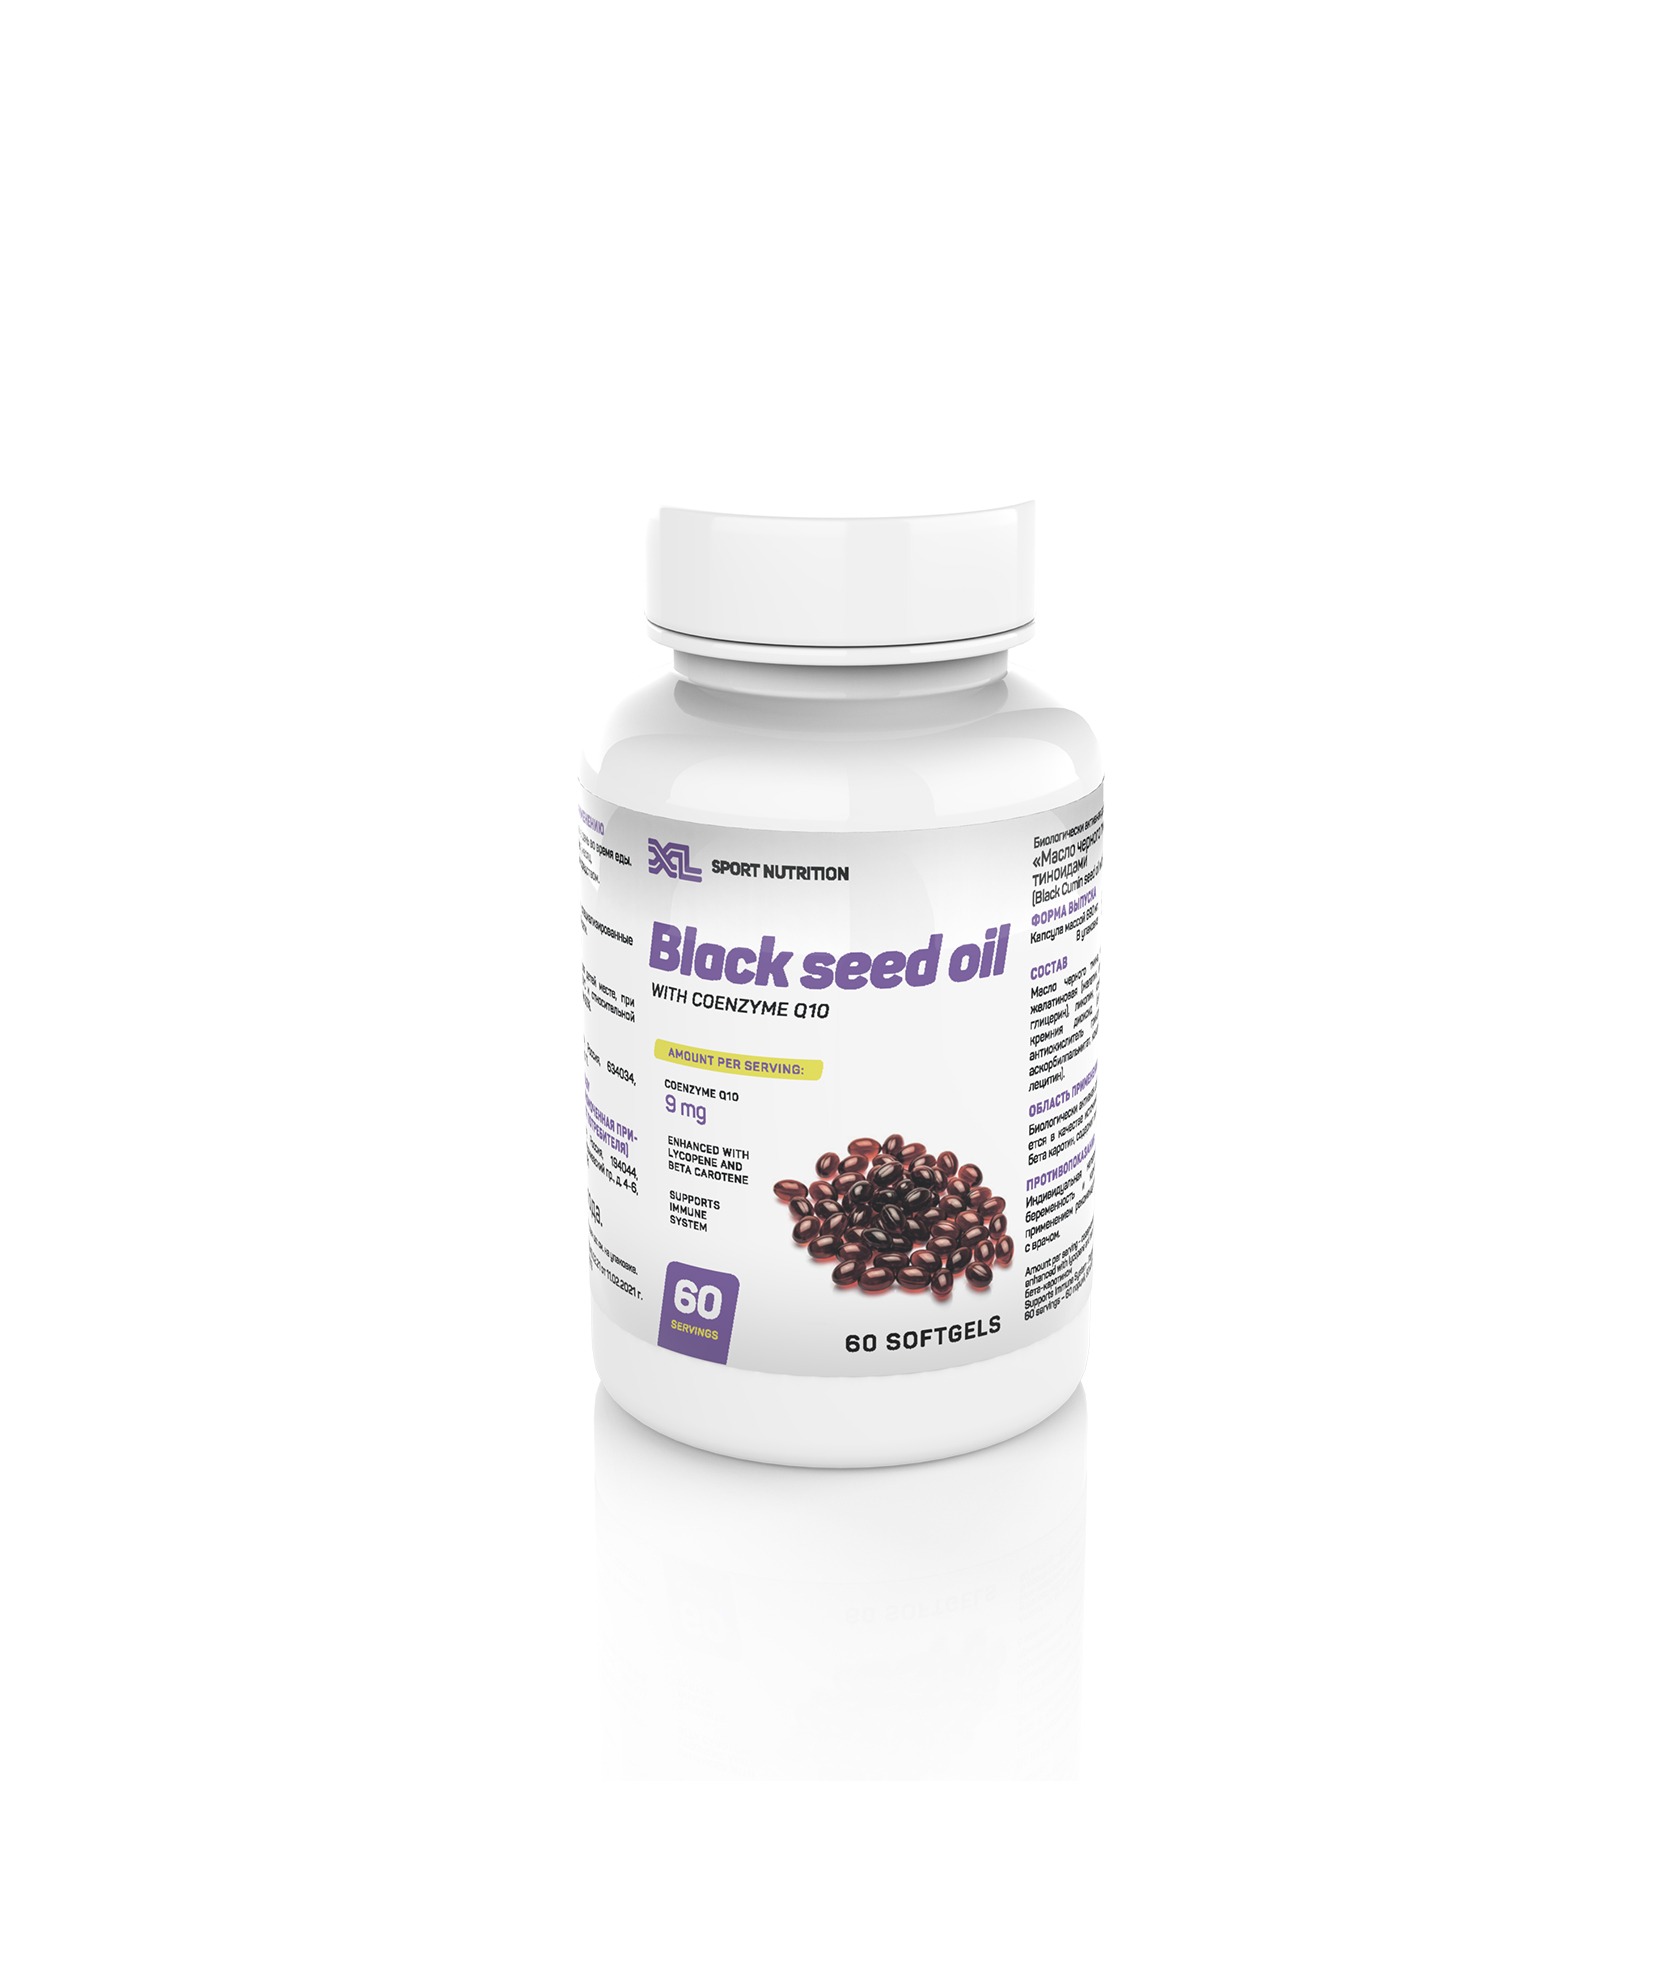 XL Black Seed Oil with Q10, 60 softgels